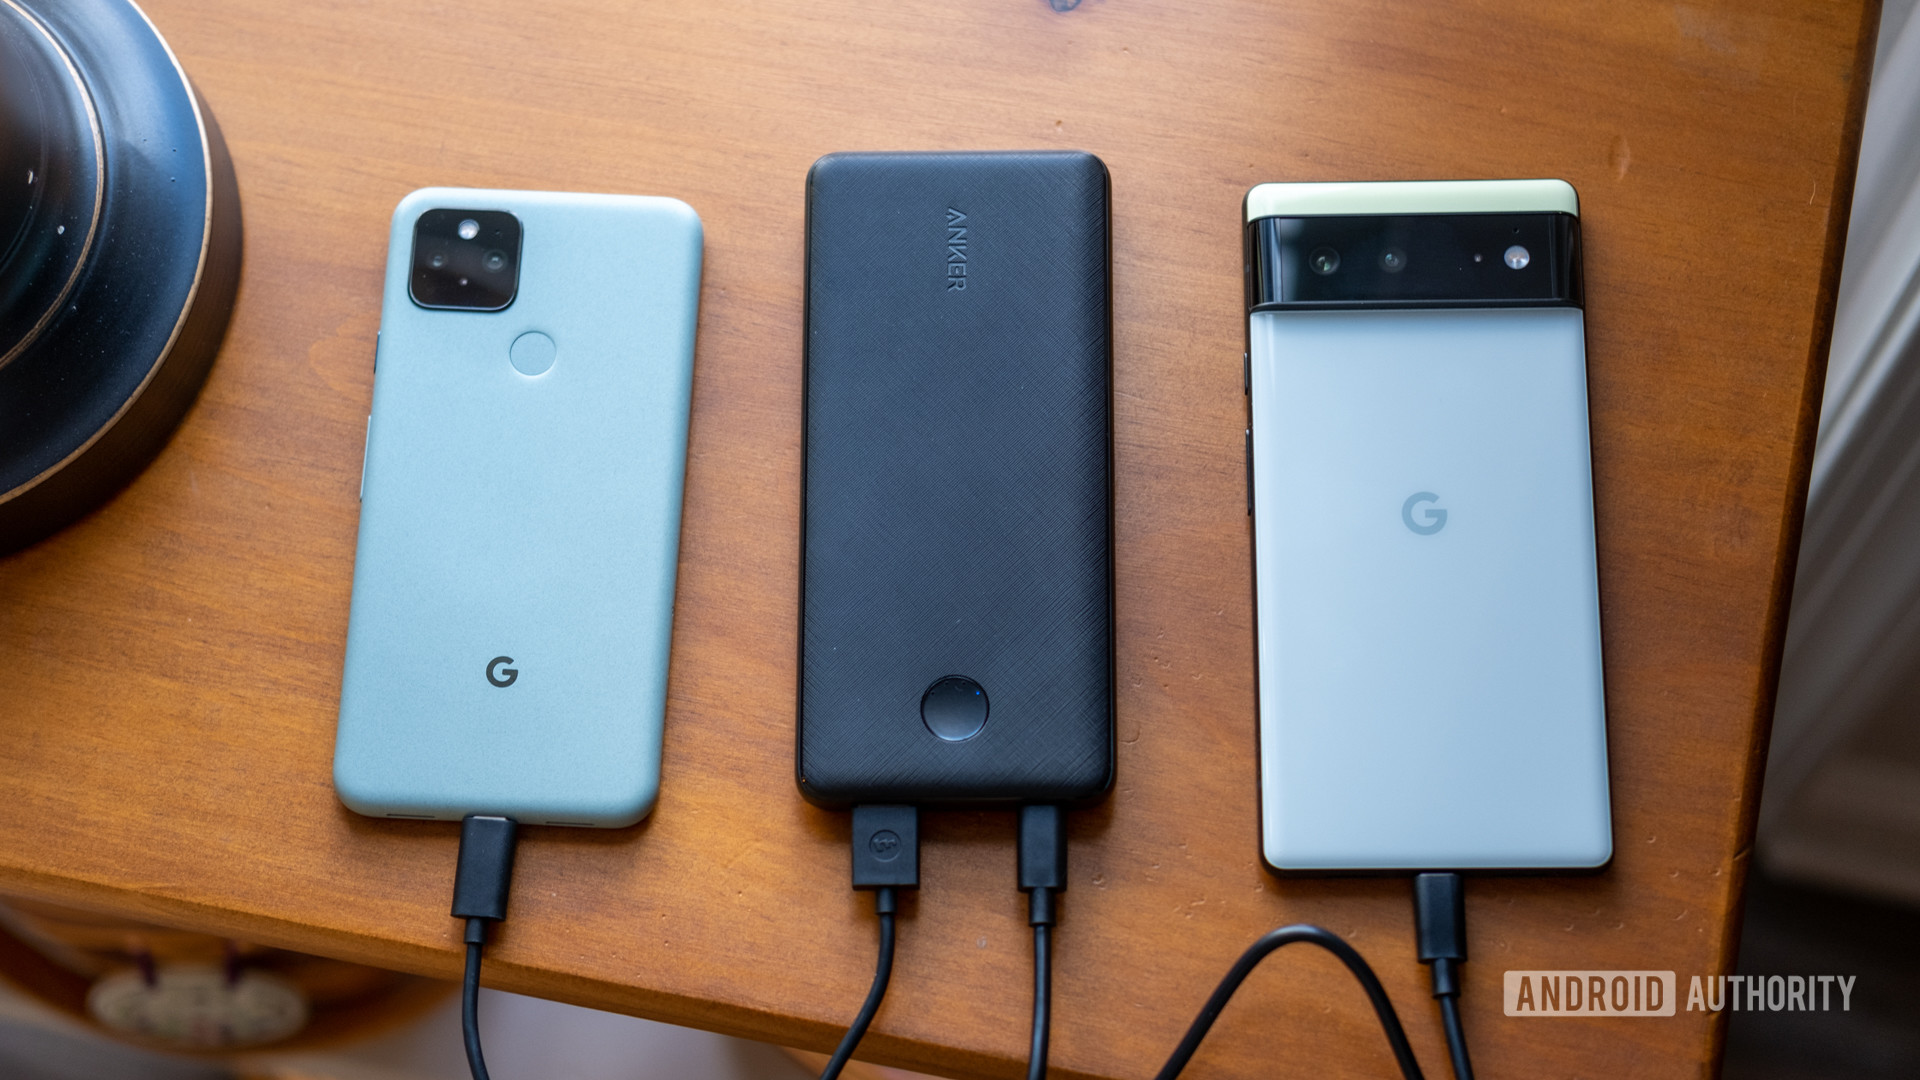 The Anker PowerCore Slim PD charging a Pixel 5 and a Pixel 6